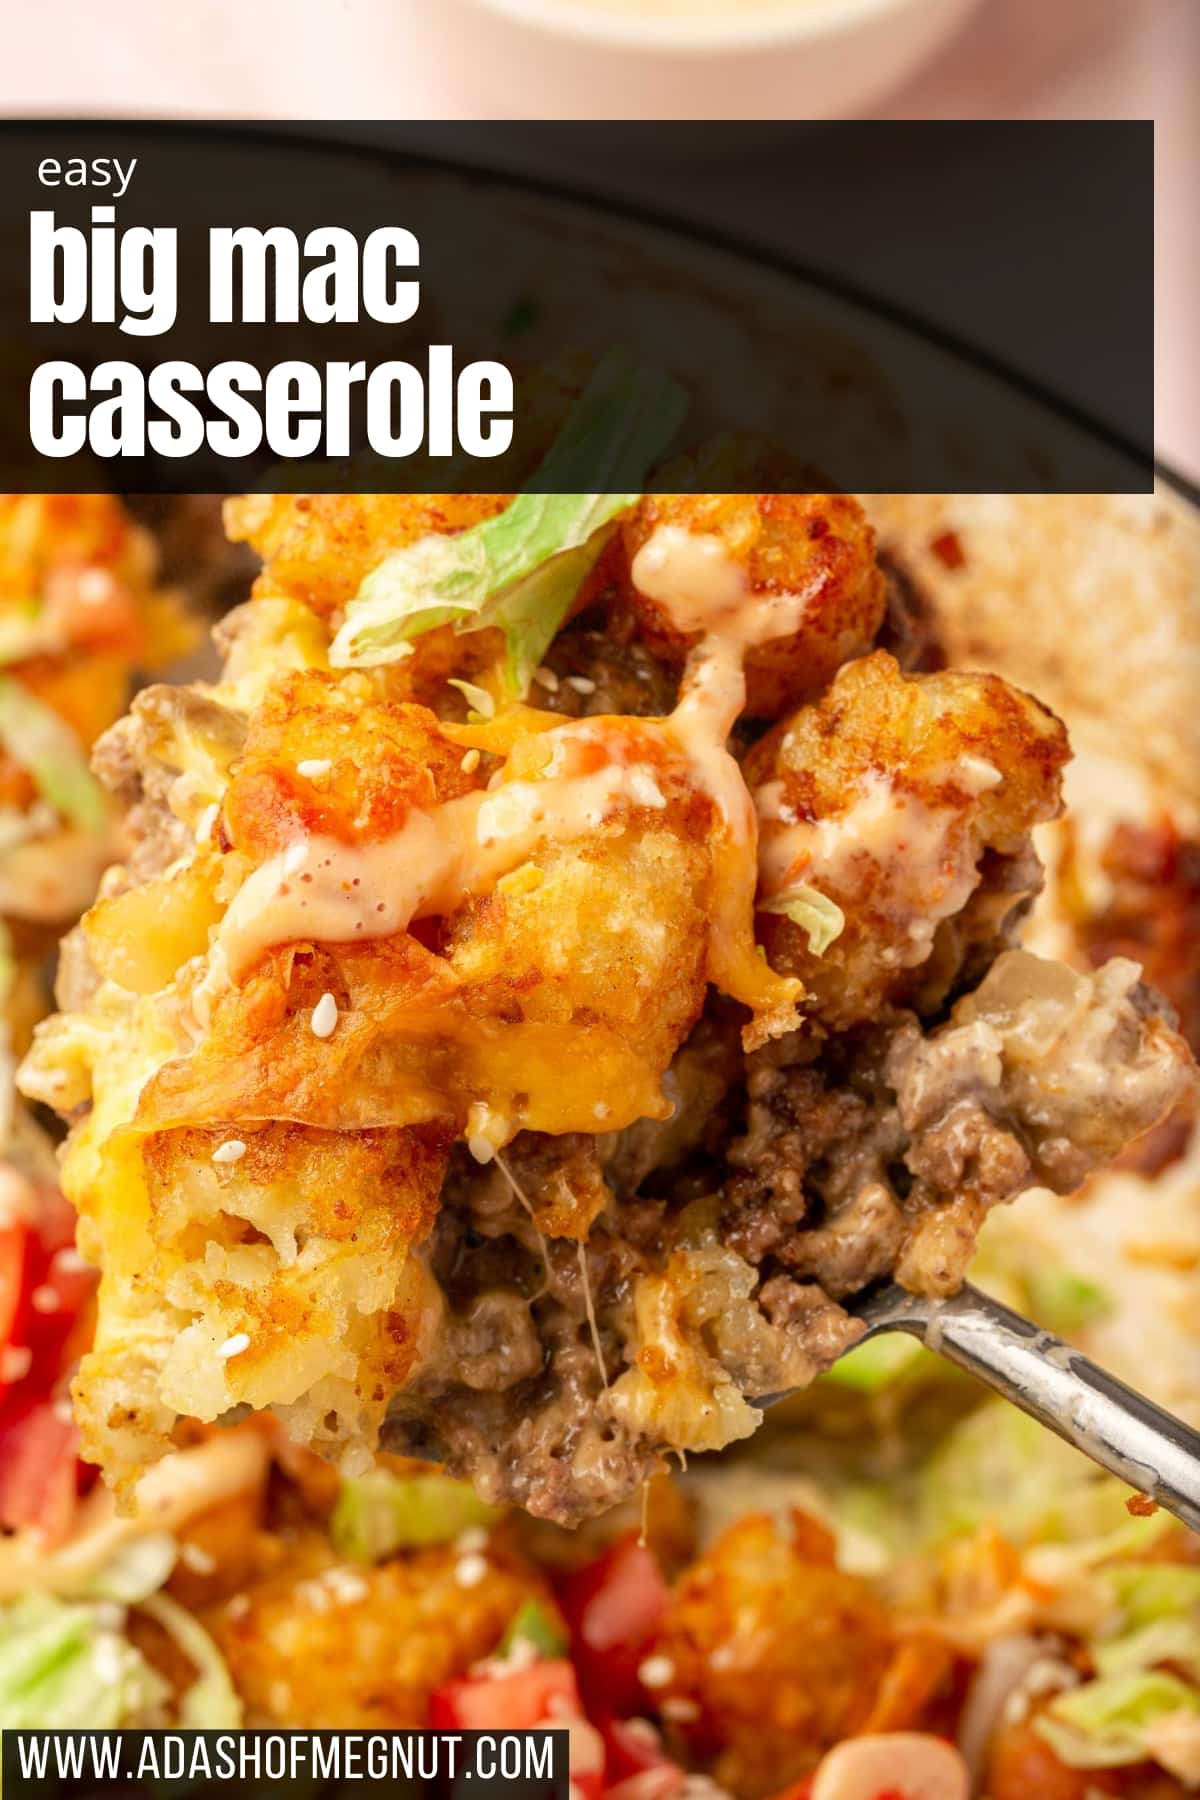 A large serving spoon scooping a portion of big mac tater tot casserole out of a larger braising pan.